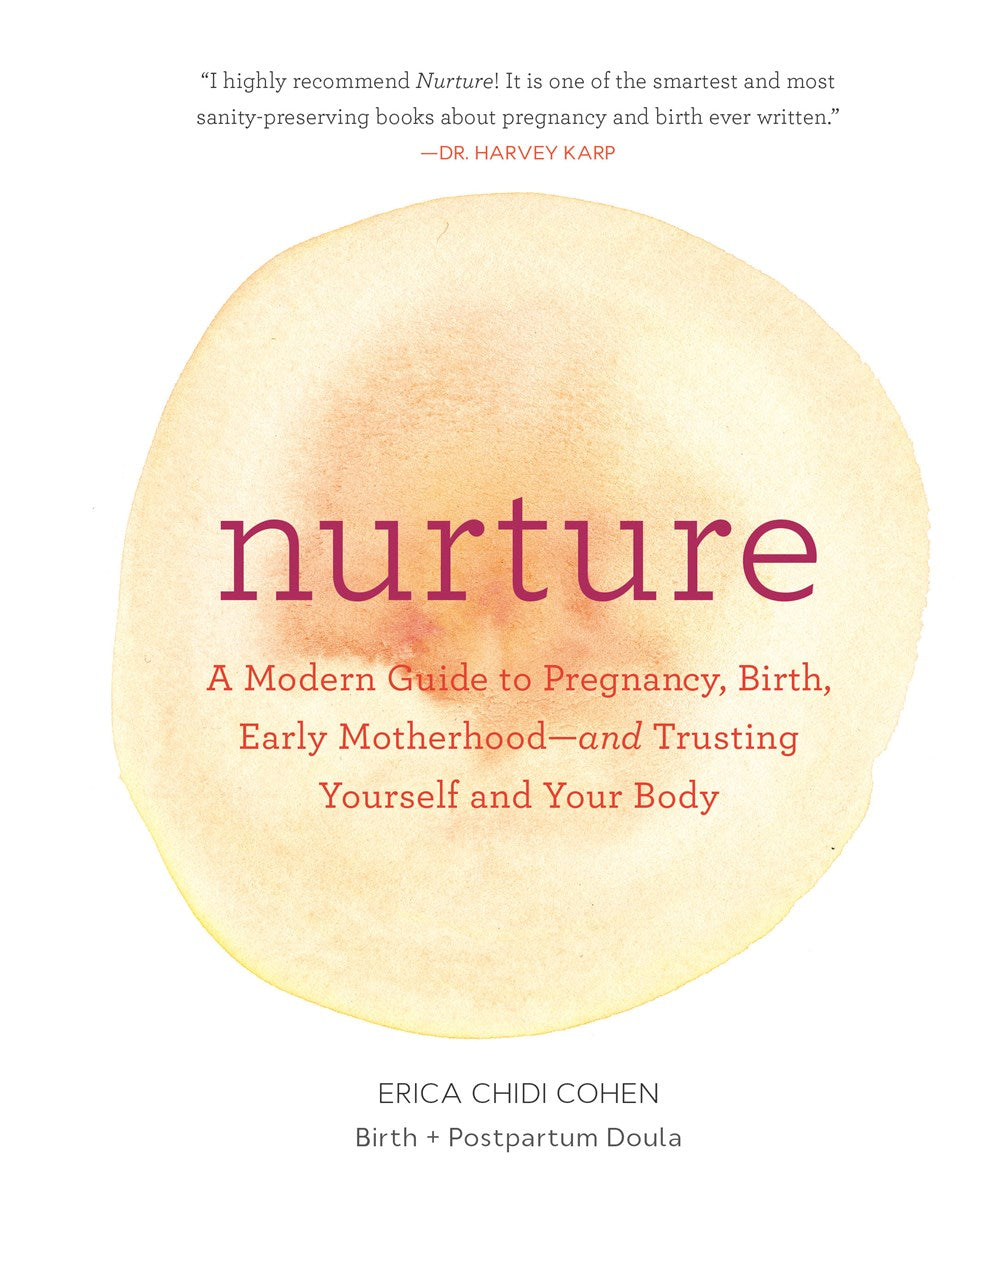 Nurture: A Modern Guide to Pregnancy, Birth, Early Motherhood—and Trusting Yourself and Your Body Erica Chidi Cohen & Jillian Ditner